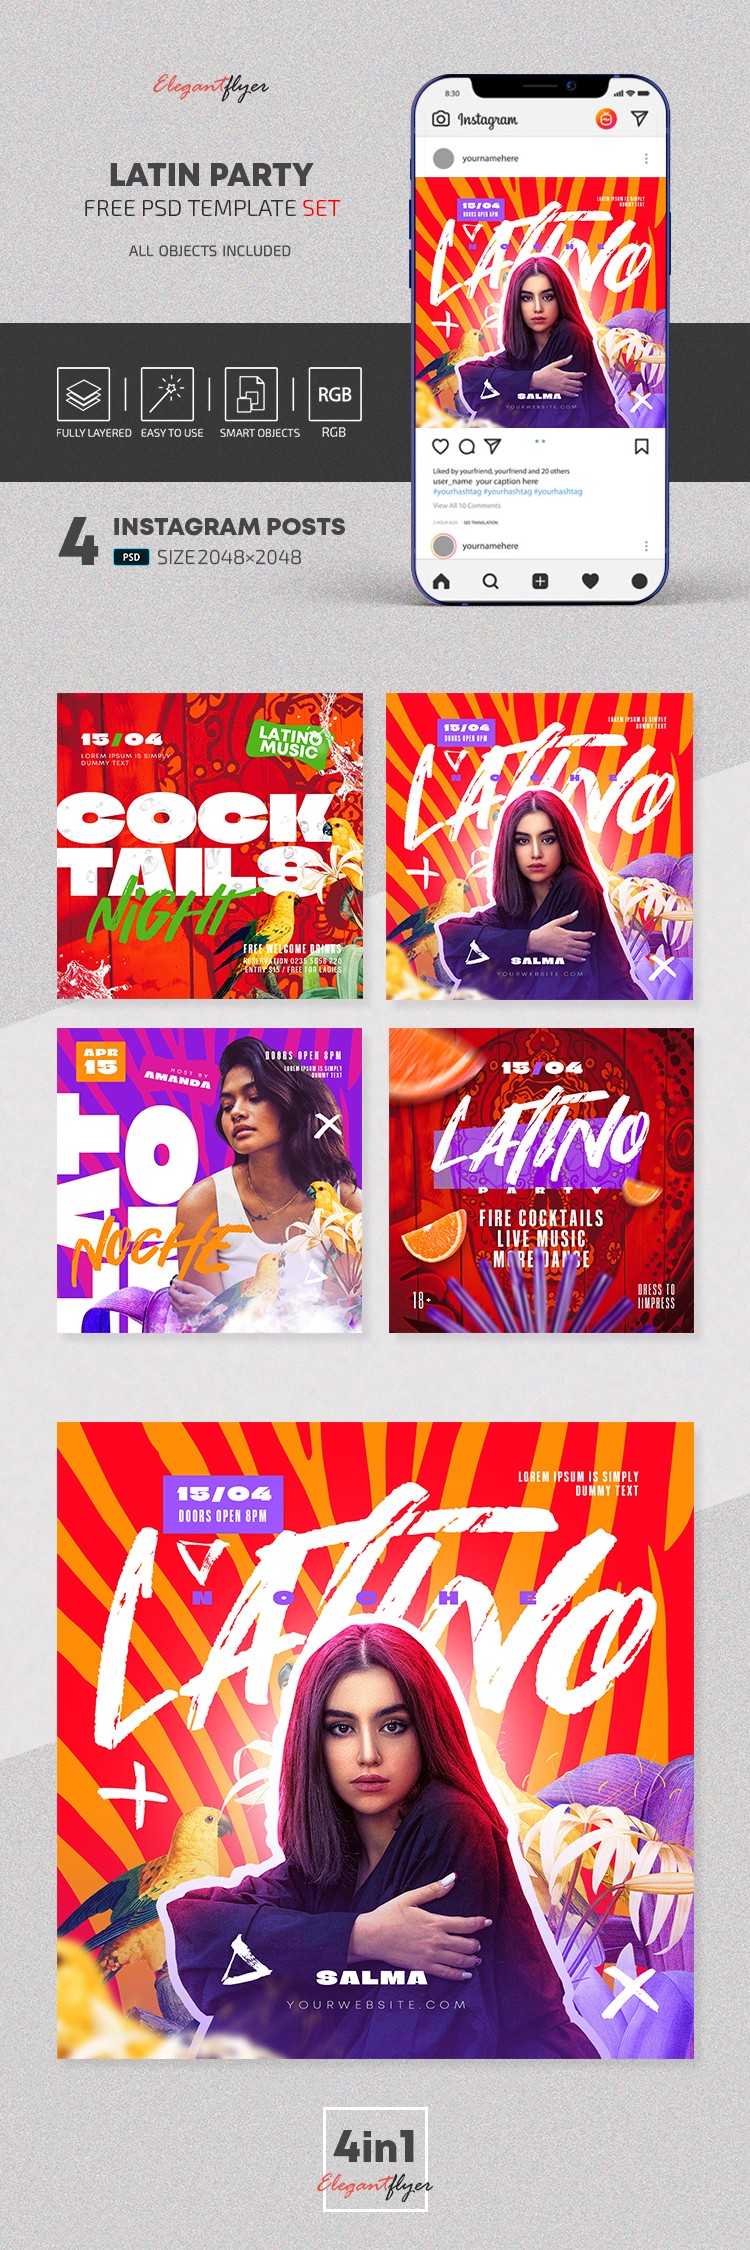 Latino Party - Free Instagram Post Templates Set in PSD by ElegantFlyer